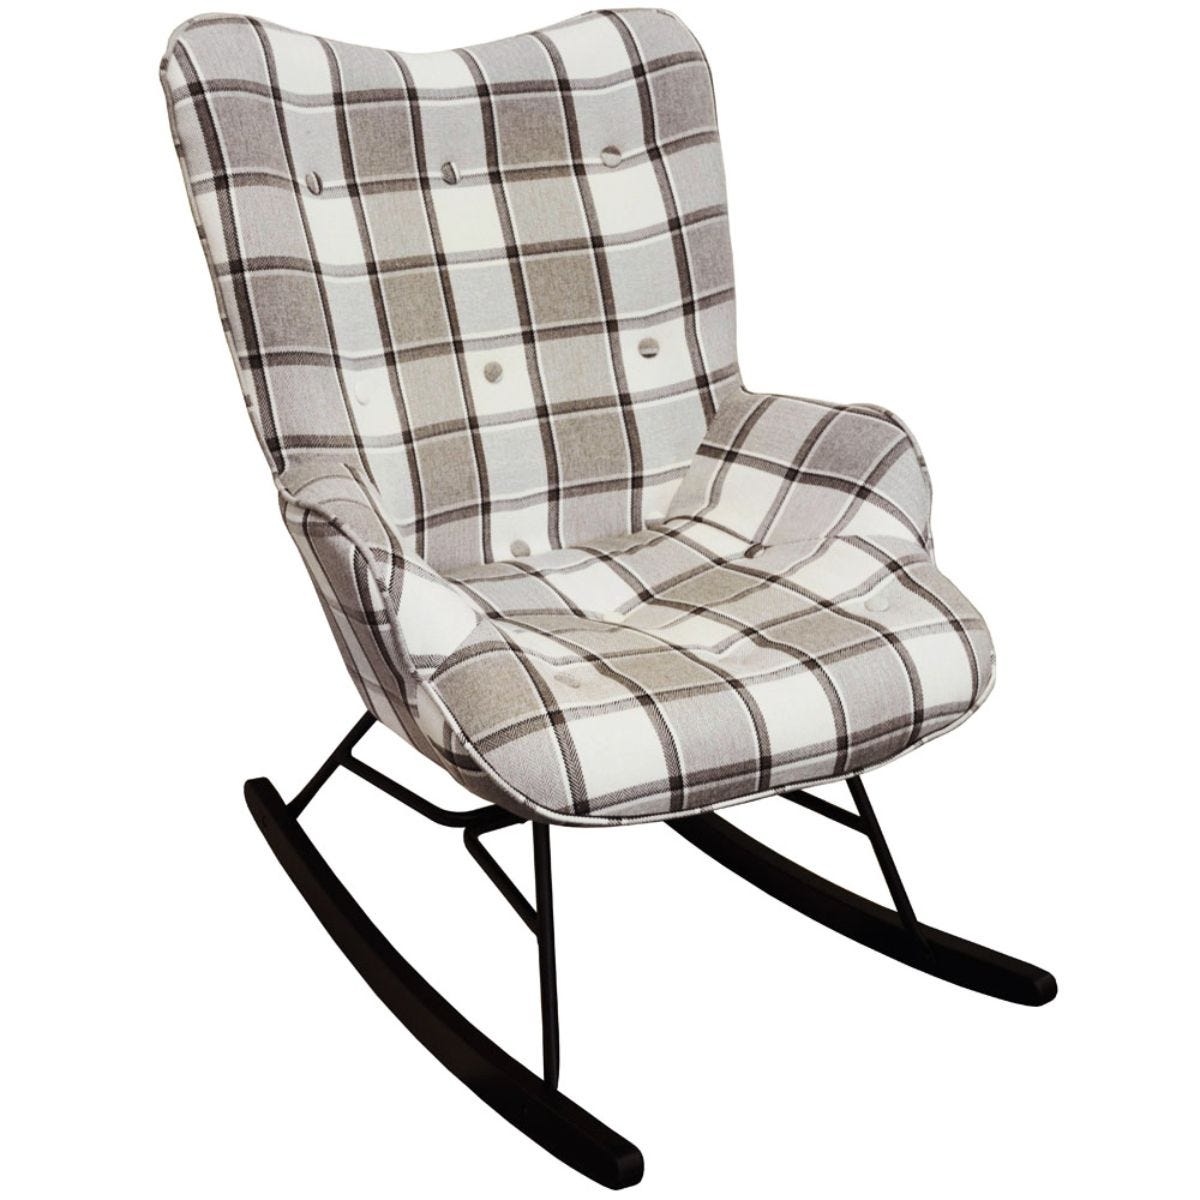 Techstyle Check Wing Back Rocking / Nursing Chair With Checked Tartan Fabric Grey / White / Black